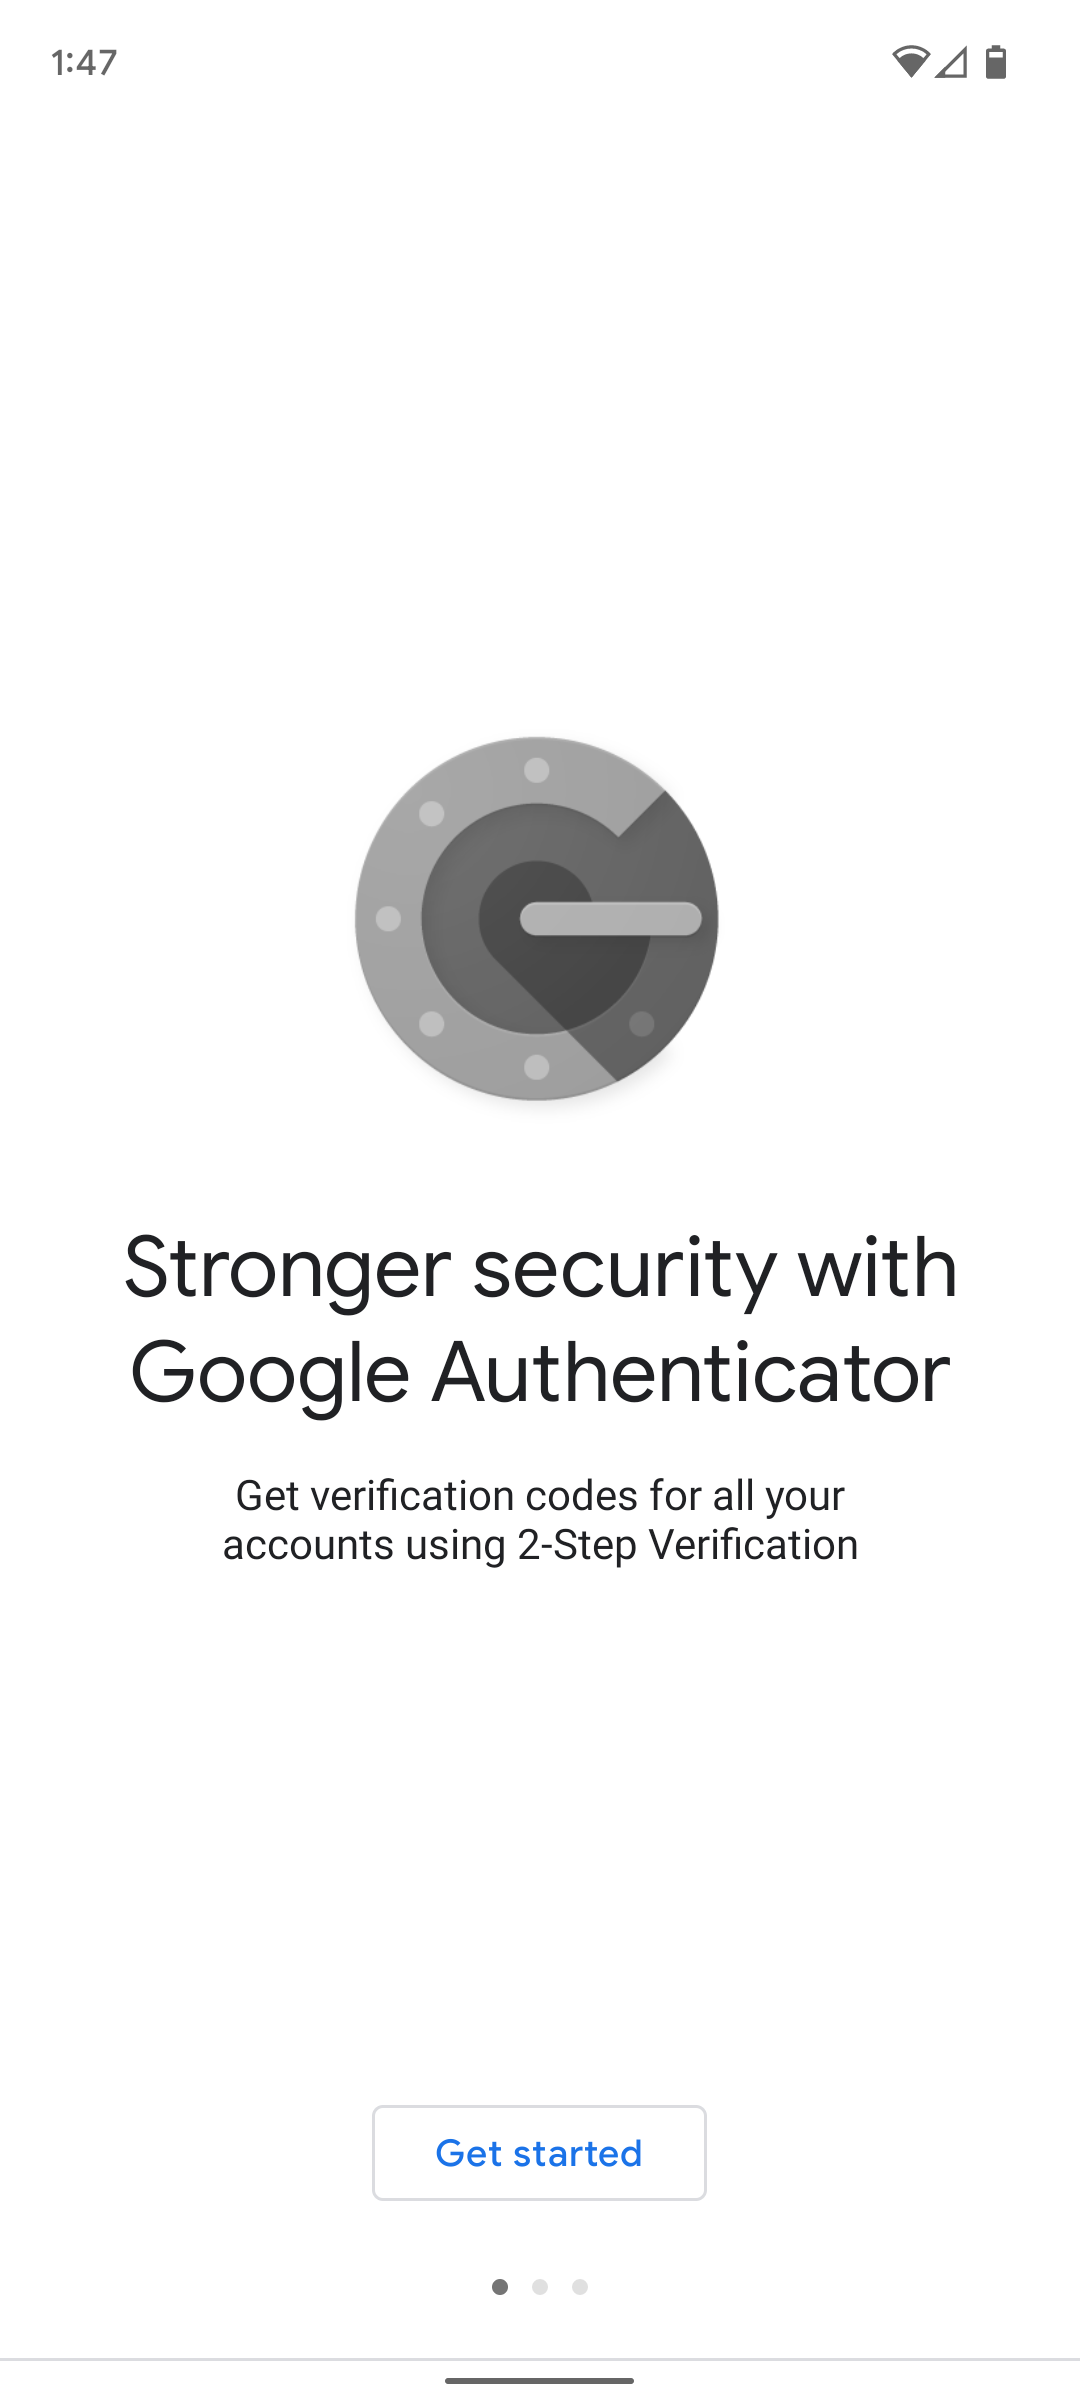 google-authenticator-get-started